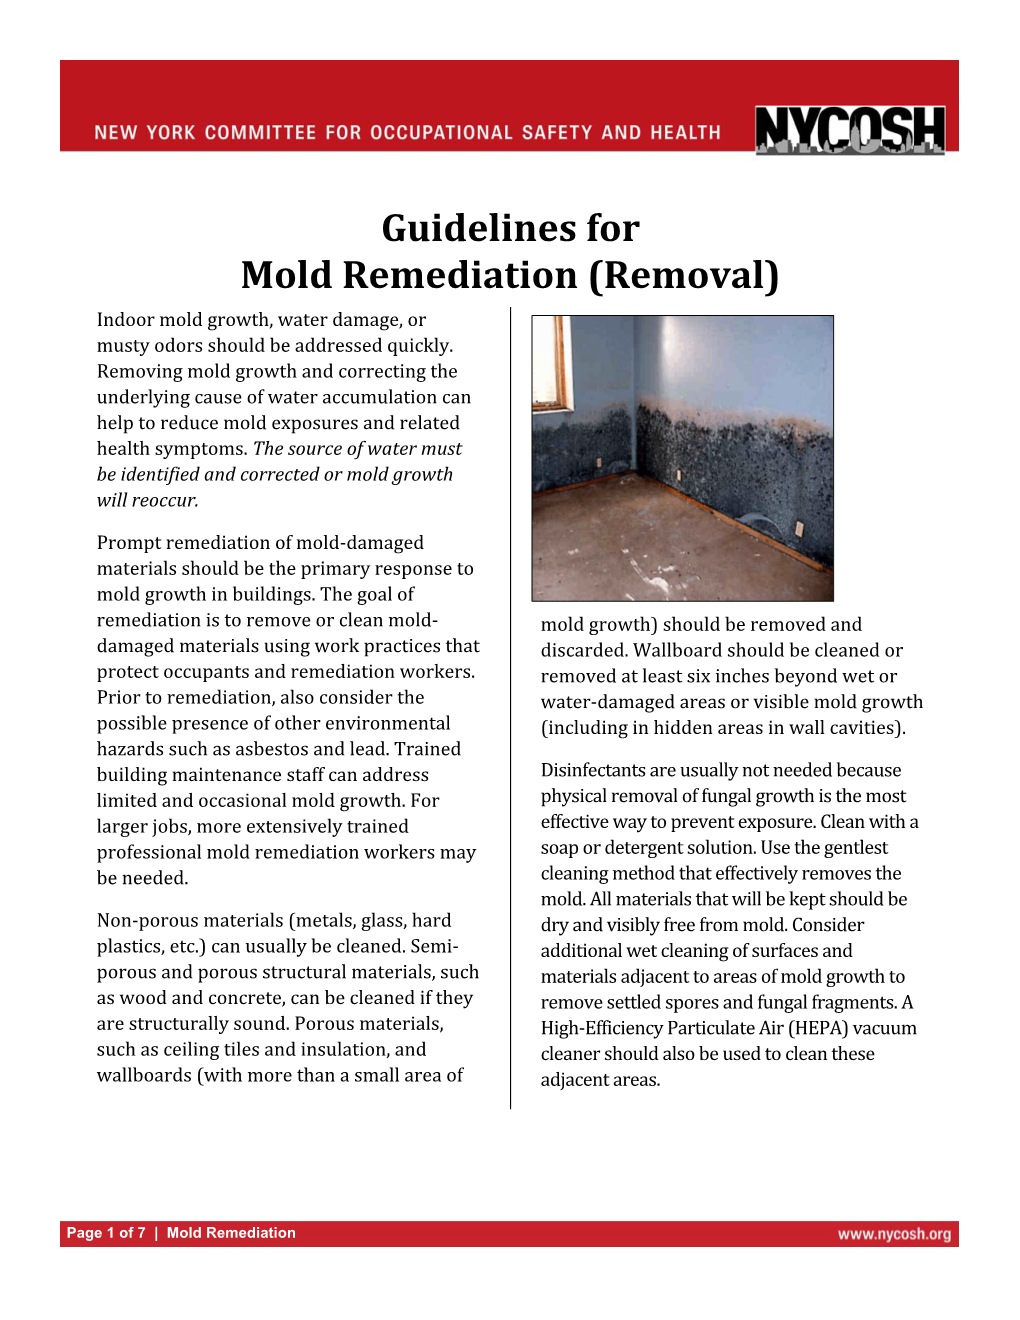 Guidelines for Mold Remediation (Removal) Indoor Mold Growth, Water Damage, Or Musty Odors Should Be Addressed Quickly